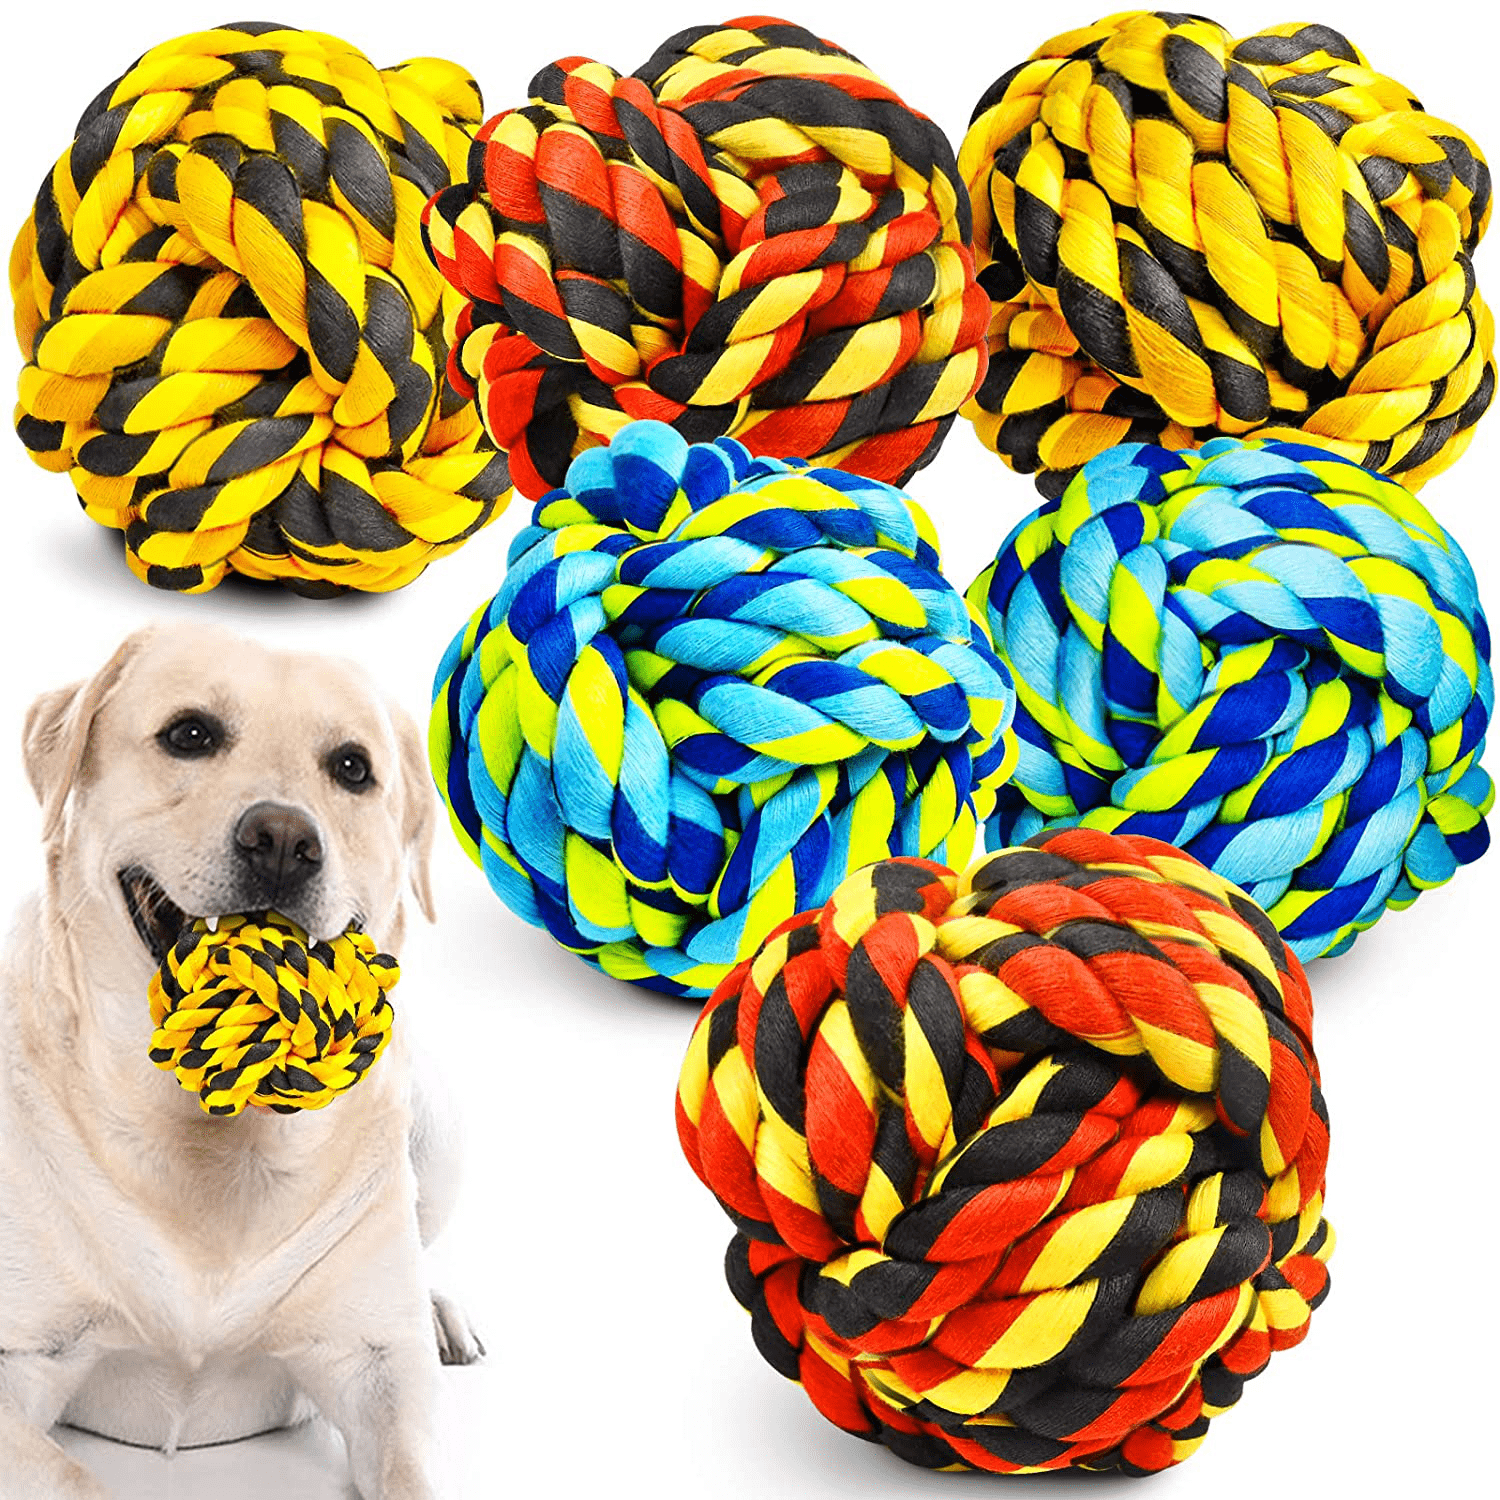 http://kol.pet/cdn/shop/products/xl-dog-chew-toys-for-aggressive-chewers-dog-balls-for-large-dogs-heavy-duty-dog-toys-with-tough-twisted-dental-cotton-dog-rope-toy-for-medium-dogs-6-pack-indestructible-puppy-teething_82813ec6-7ee7-4f56-944b-66c18c13105d.png?v=1675839242